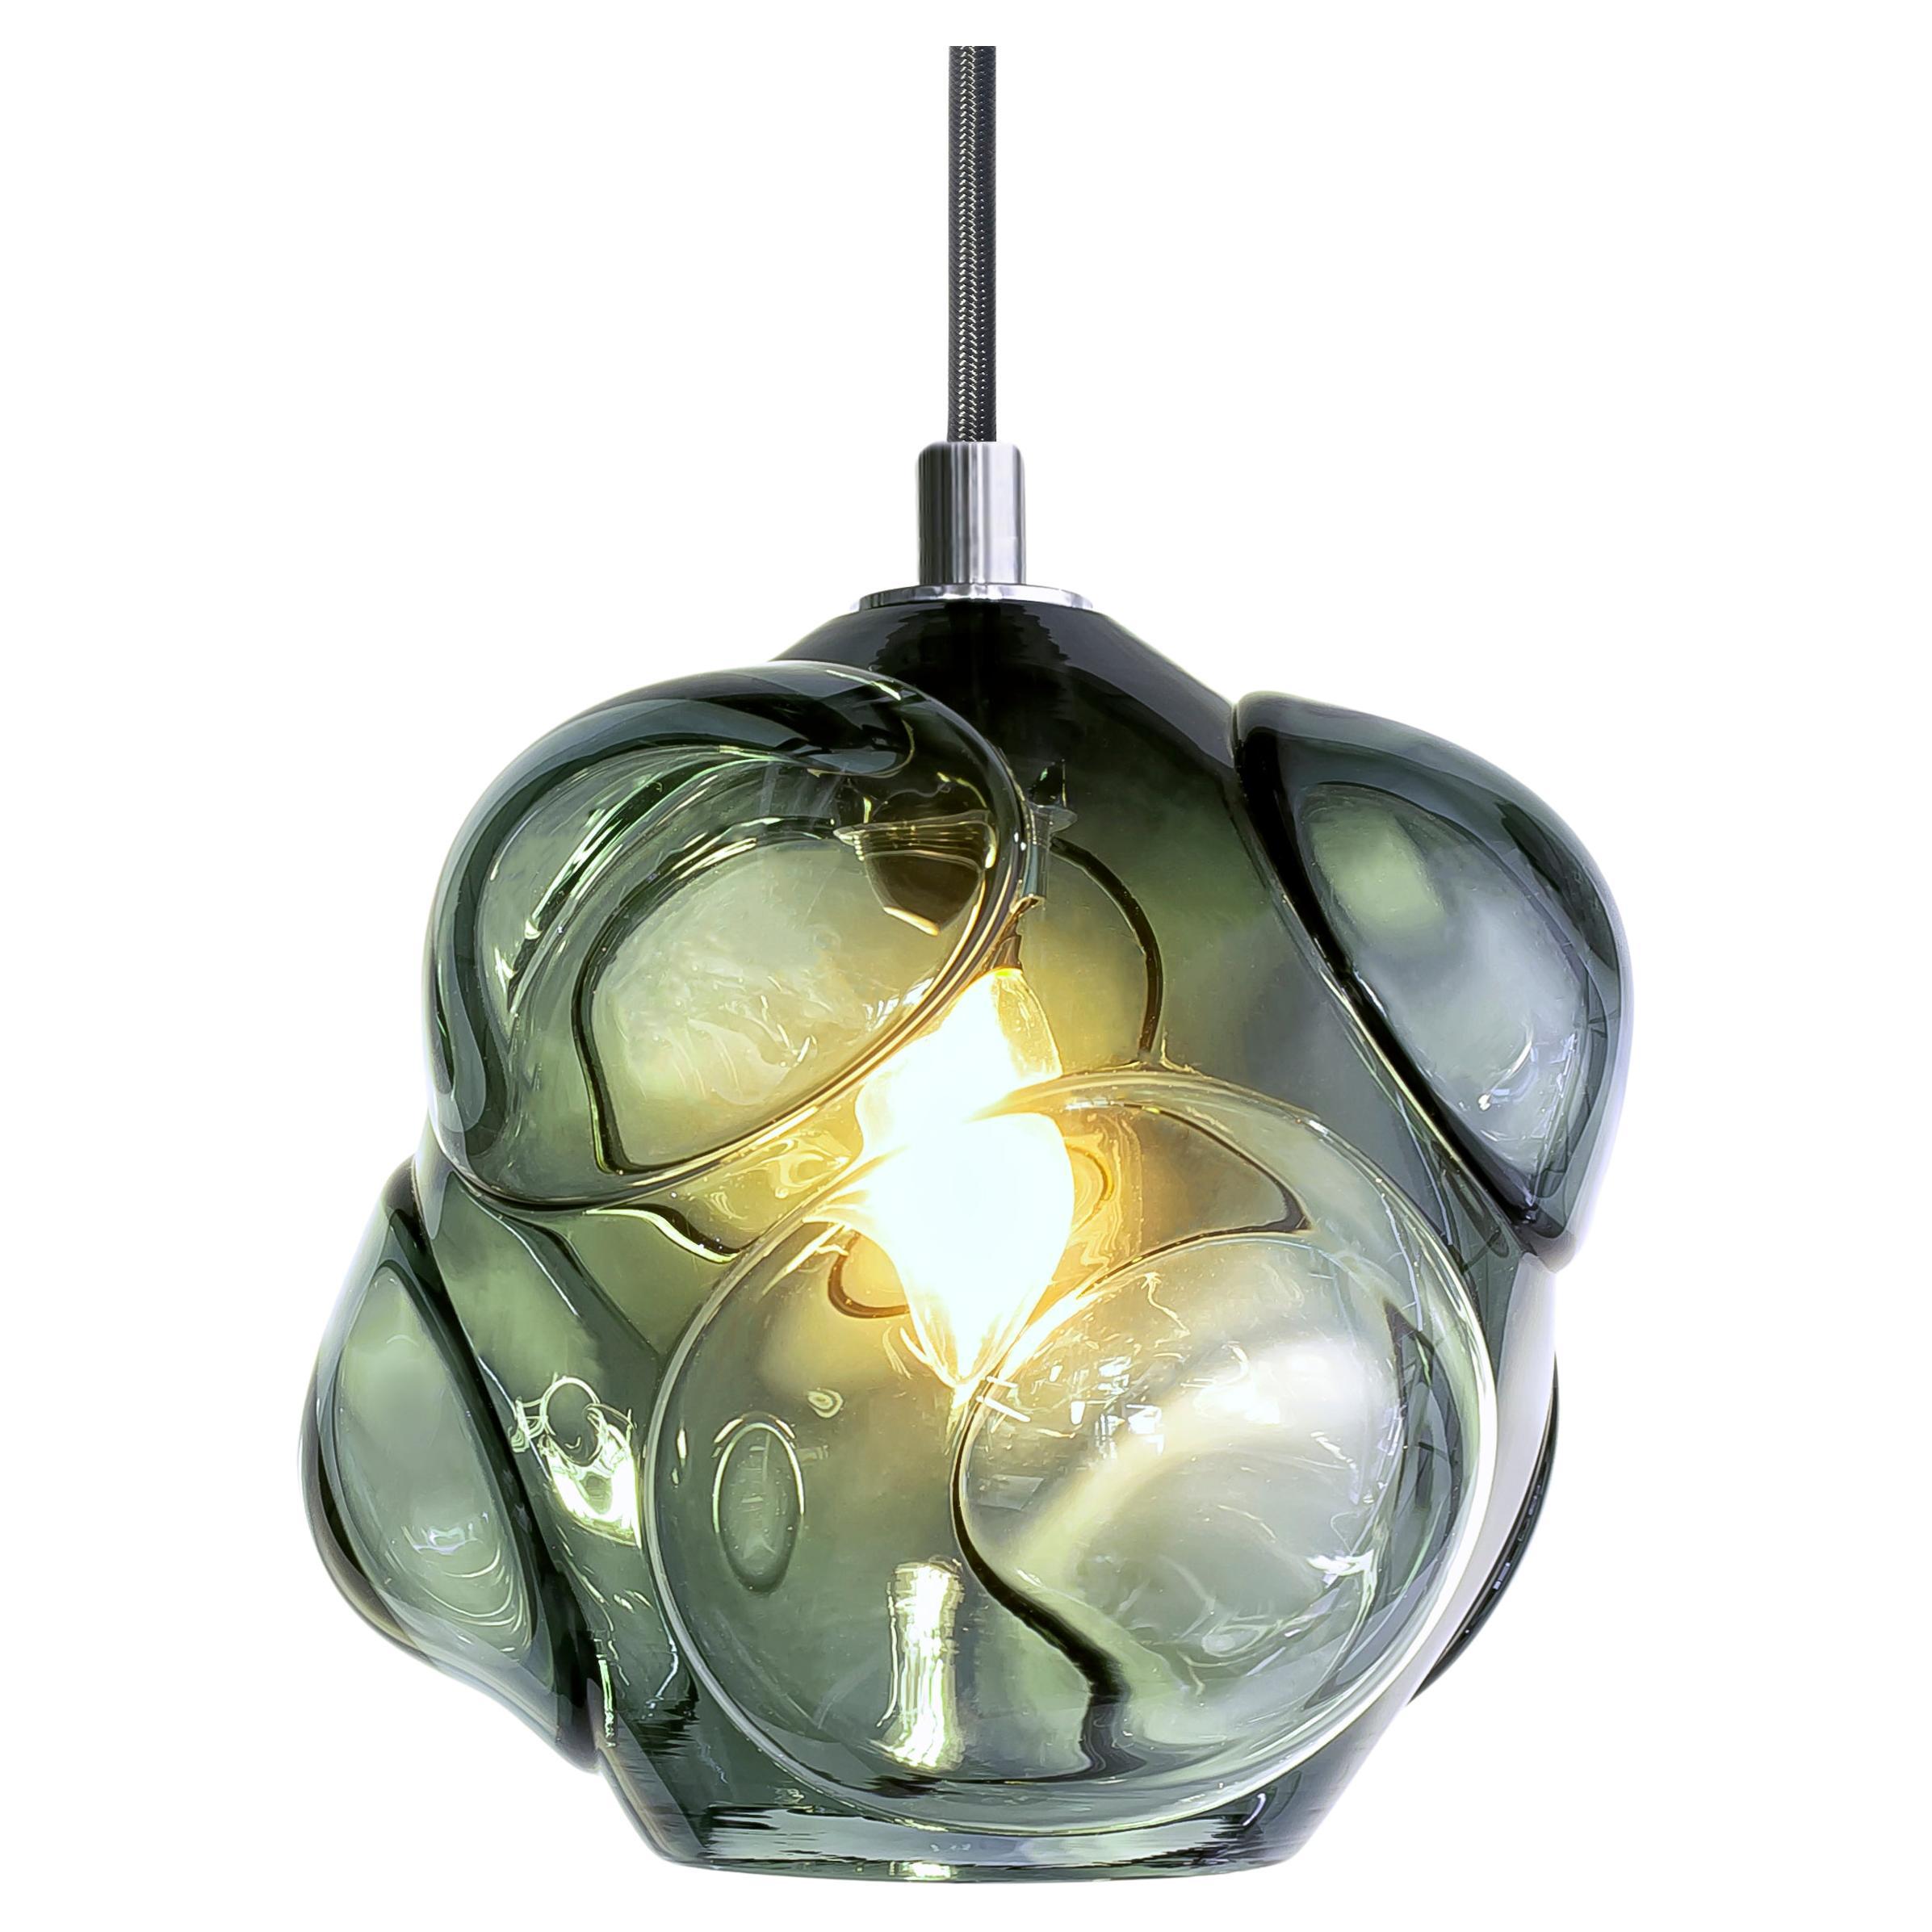 Cumulo Grey, Pendant Light, Hand Blown Glass - Made to Order For Sale